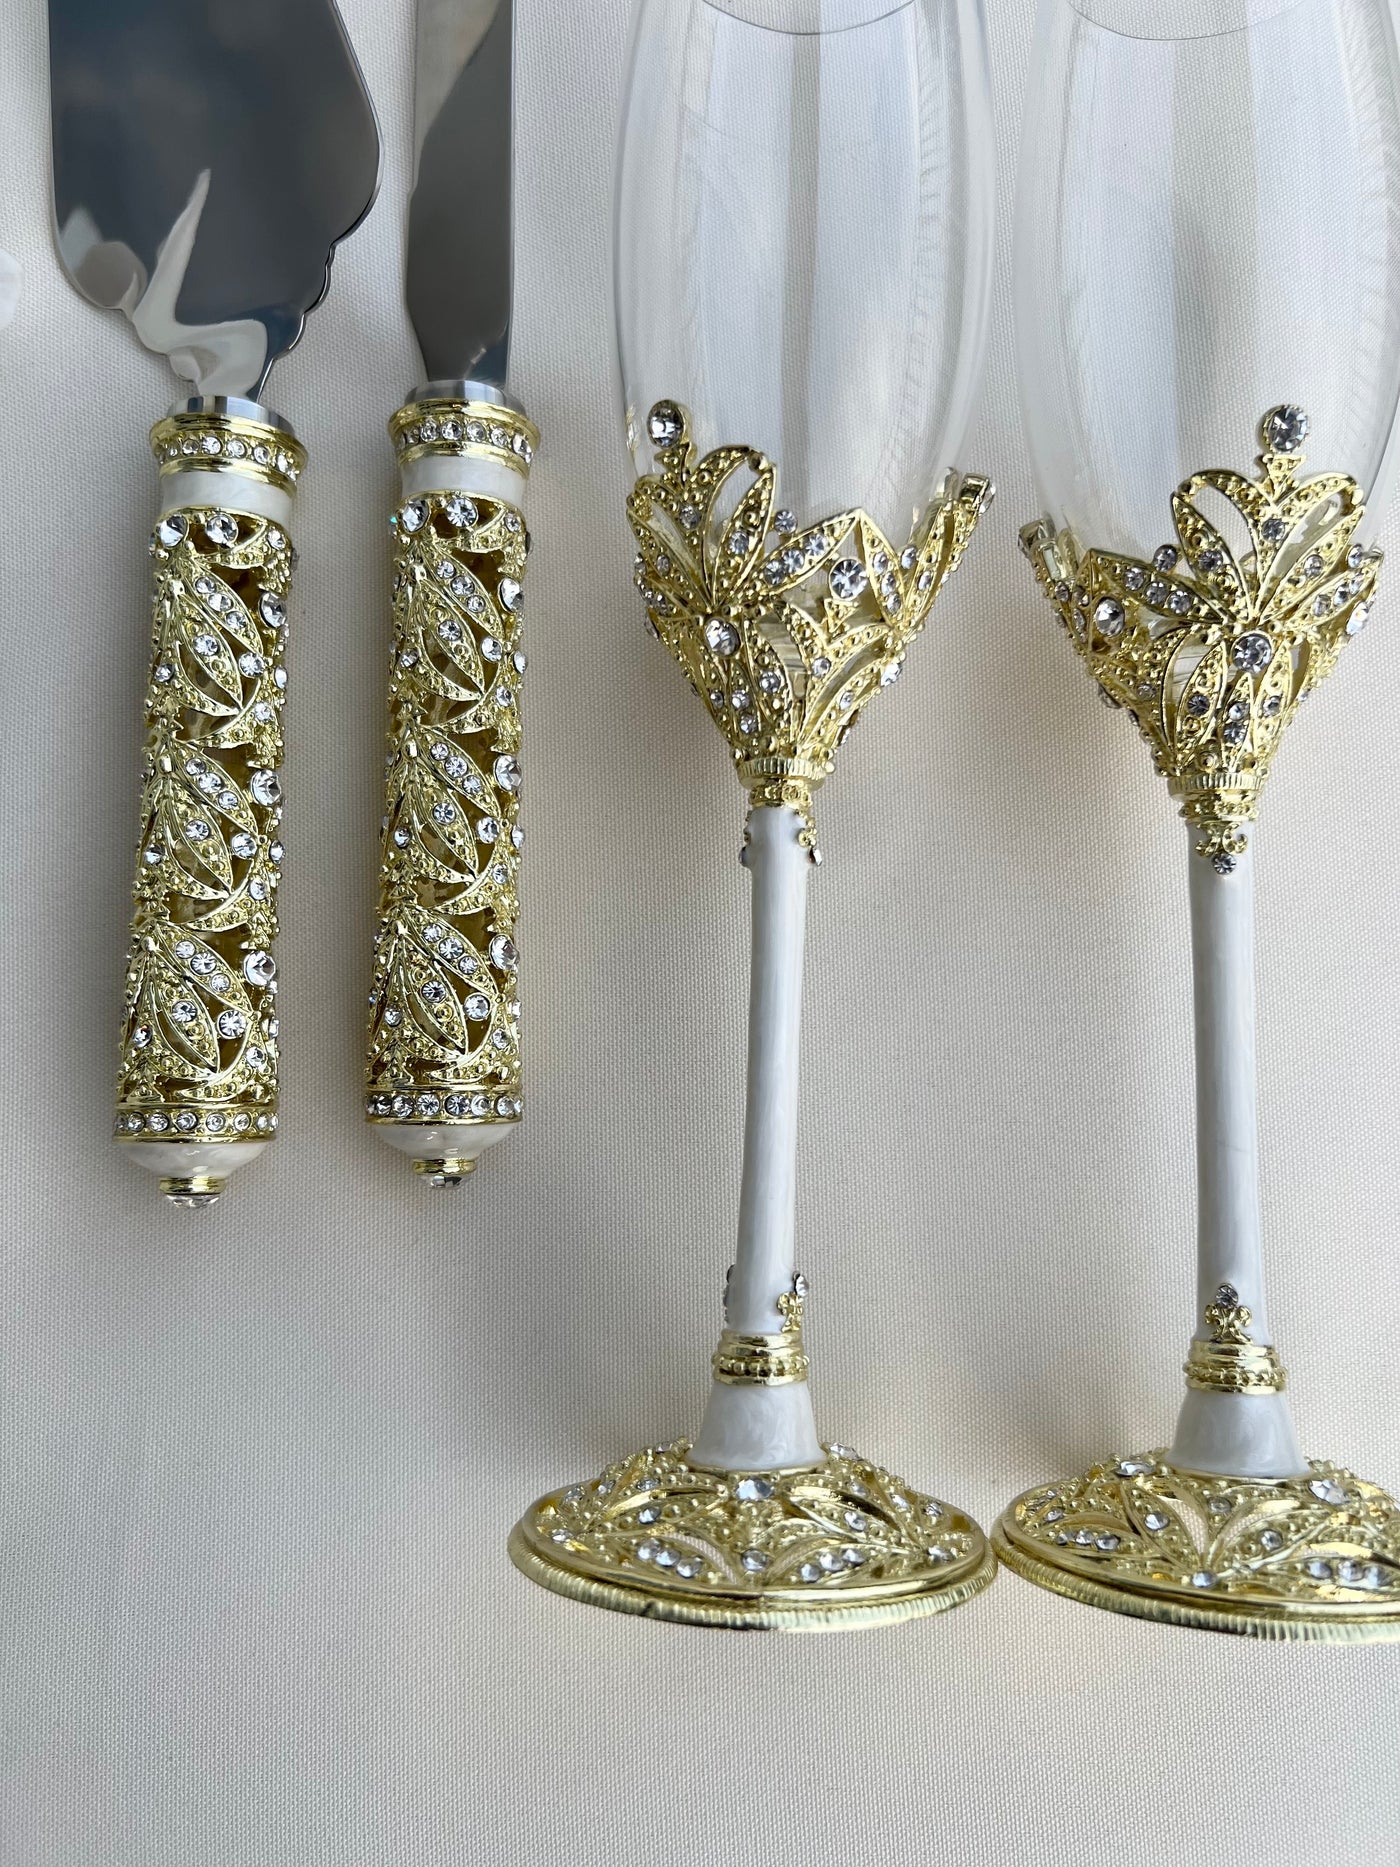 Bridal Cake Cutter & Toasting Champagne Flutes with Rhinestones & Crystals by Lucky Collections ™